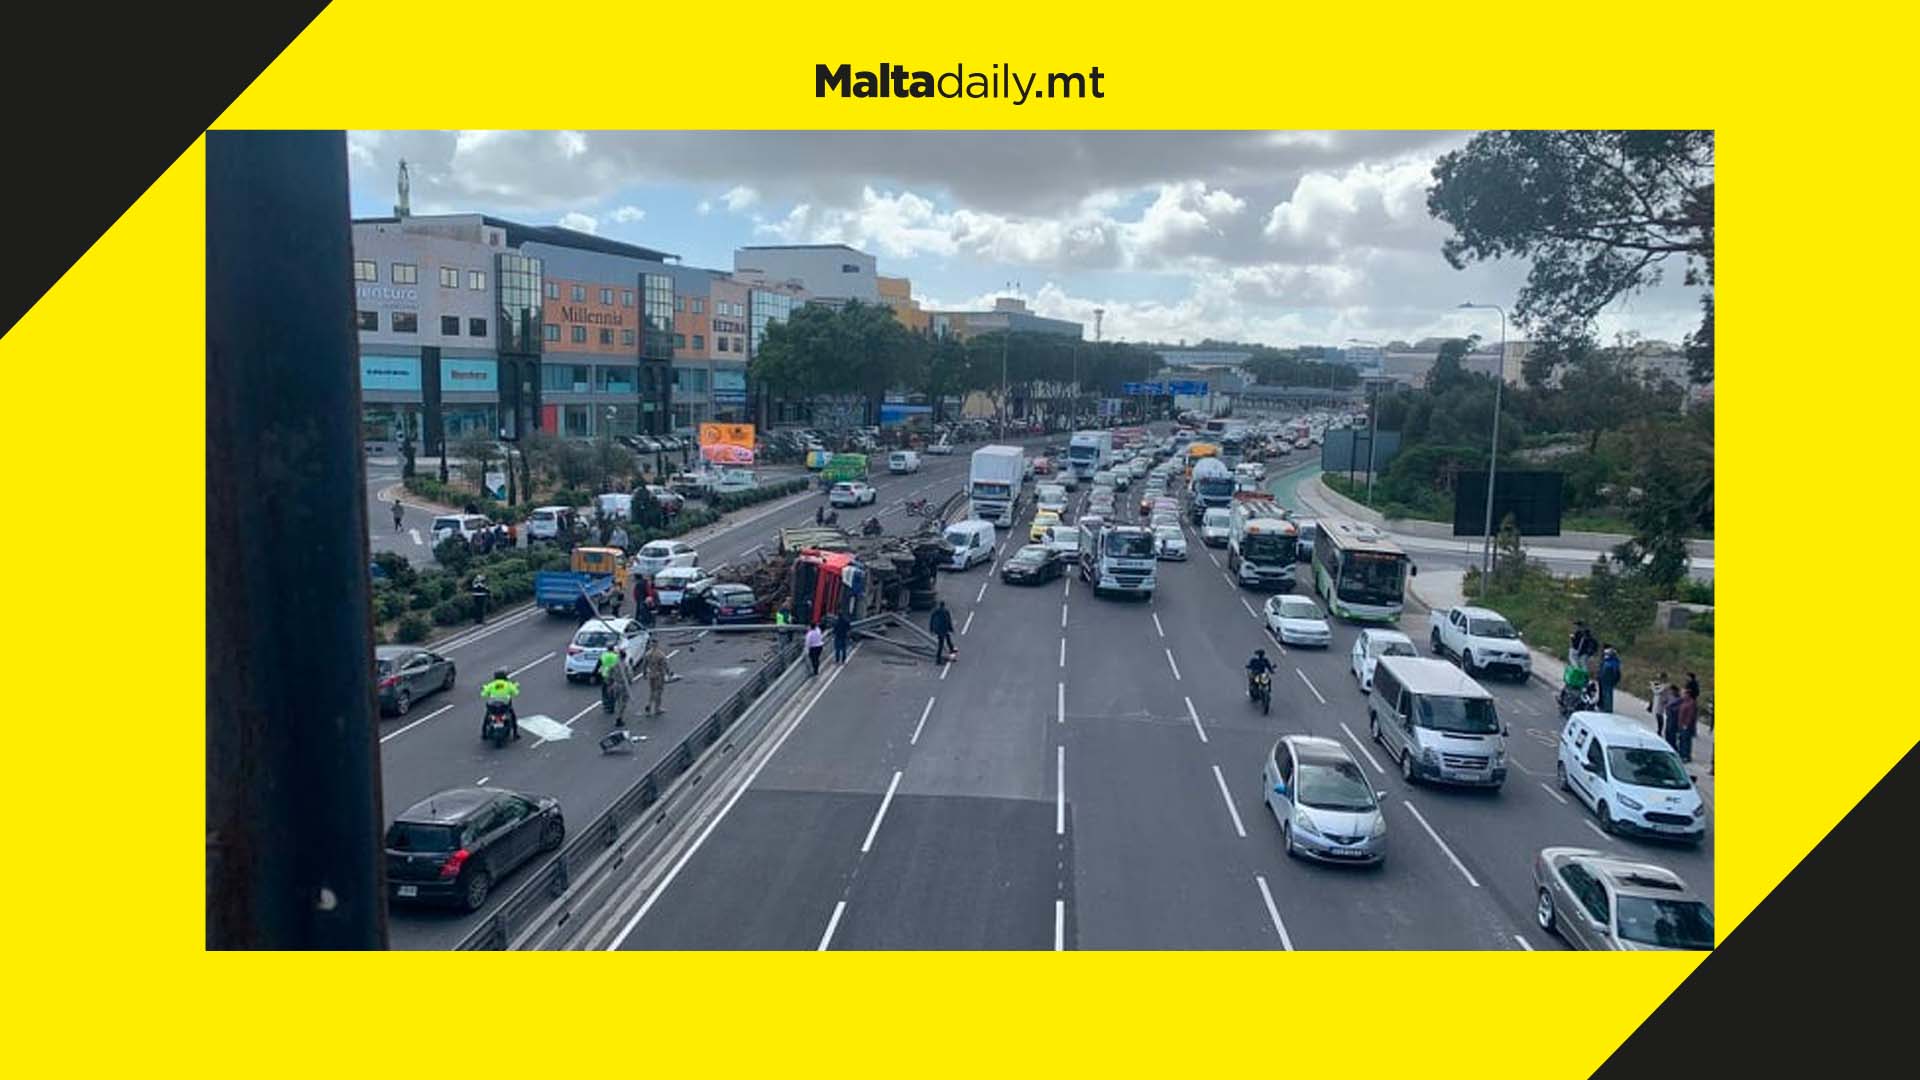 28-year-old motorcyclist dies after truck incident in Aldo Moro Marsa